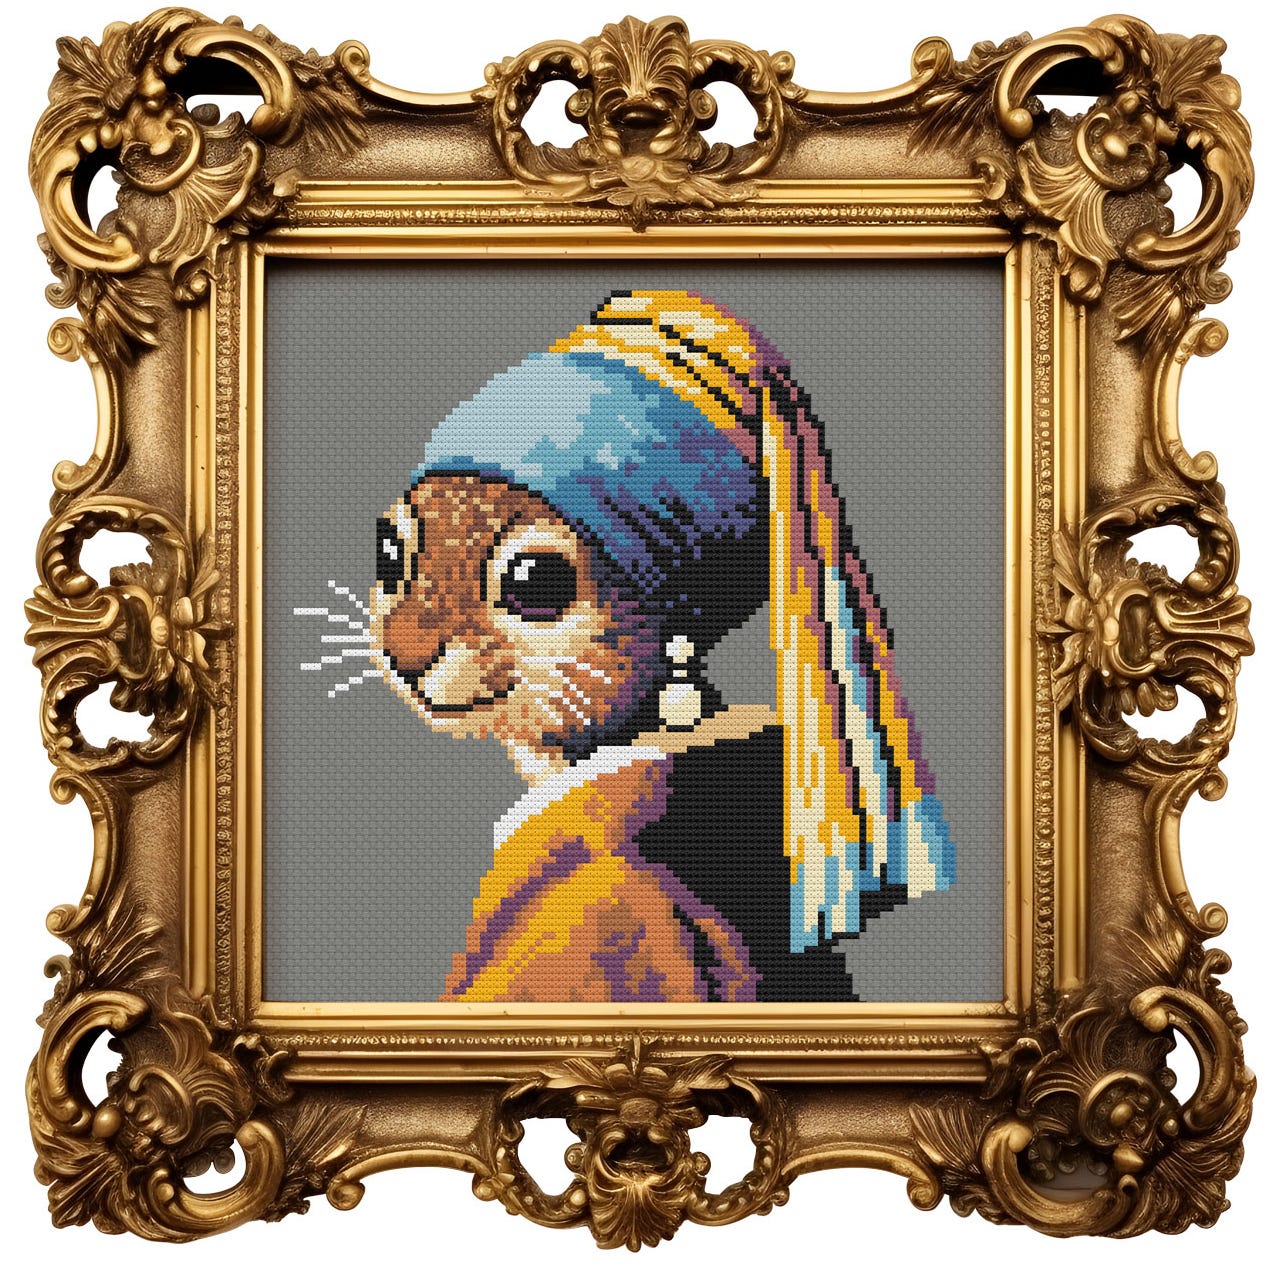 Squirrel With A Pearl Earring--my new obsession!